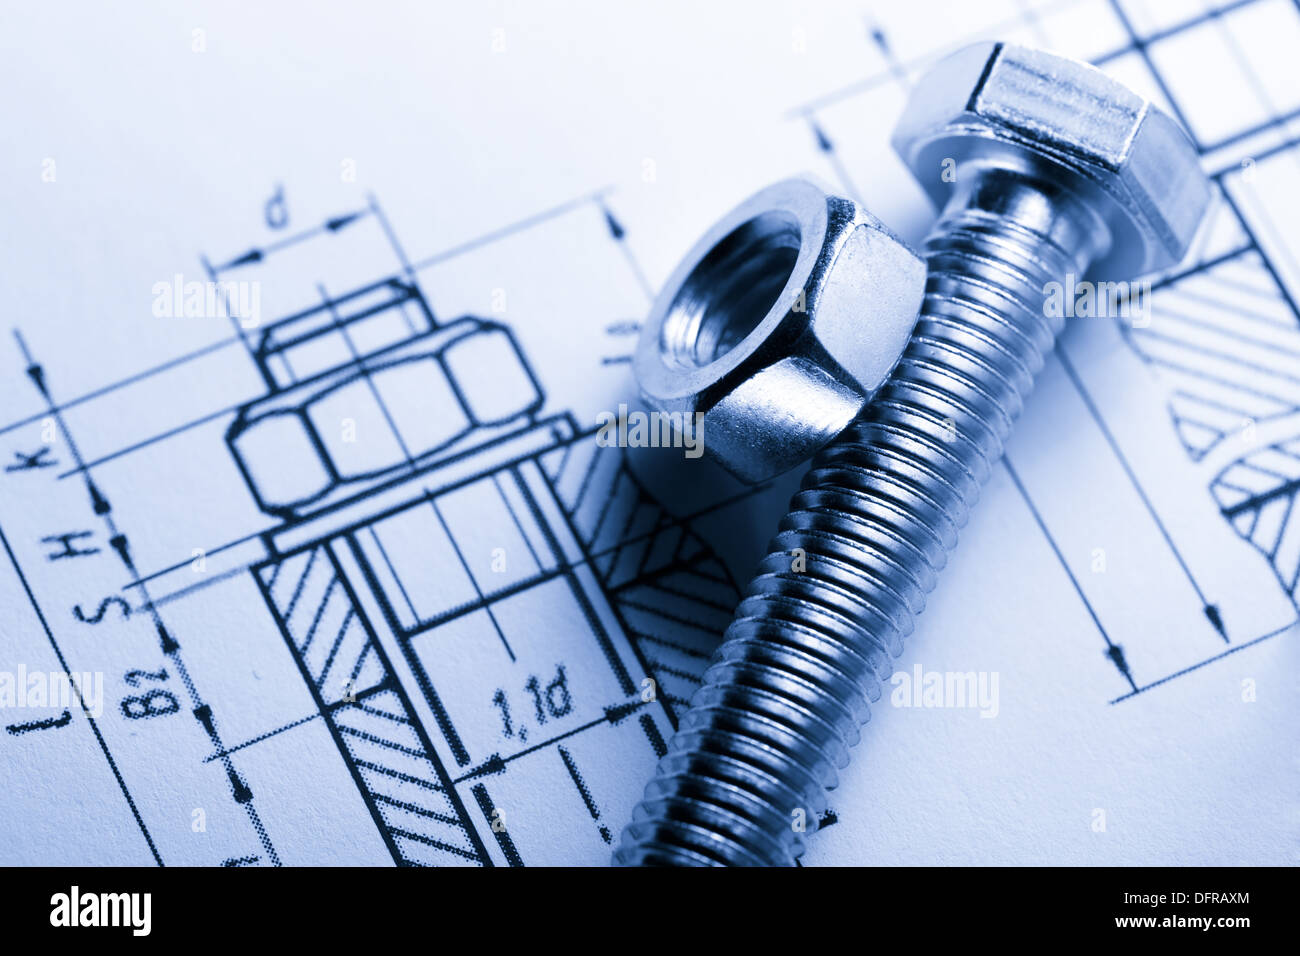 Drafting and screw bolt with nut Stock Photo